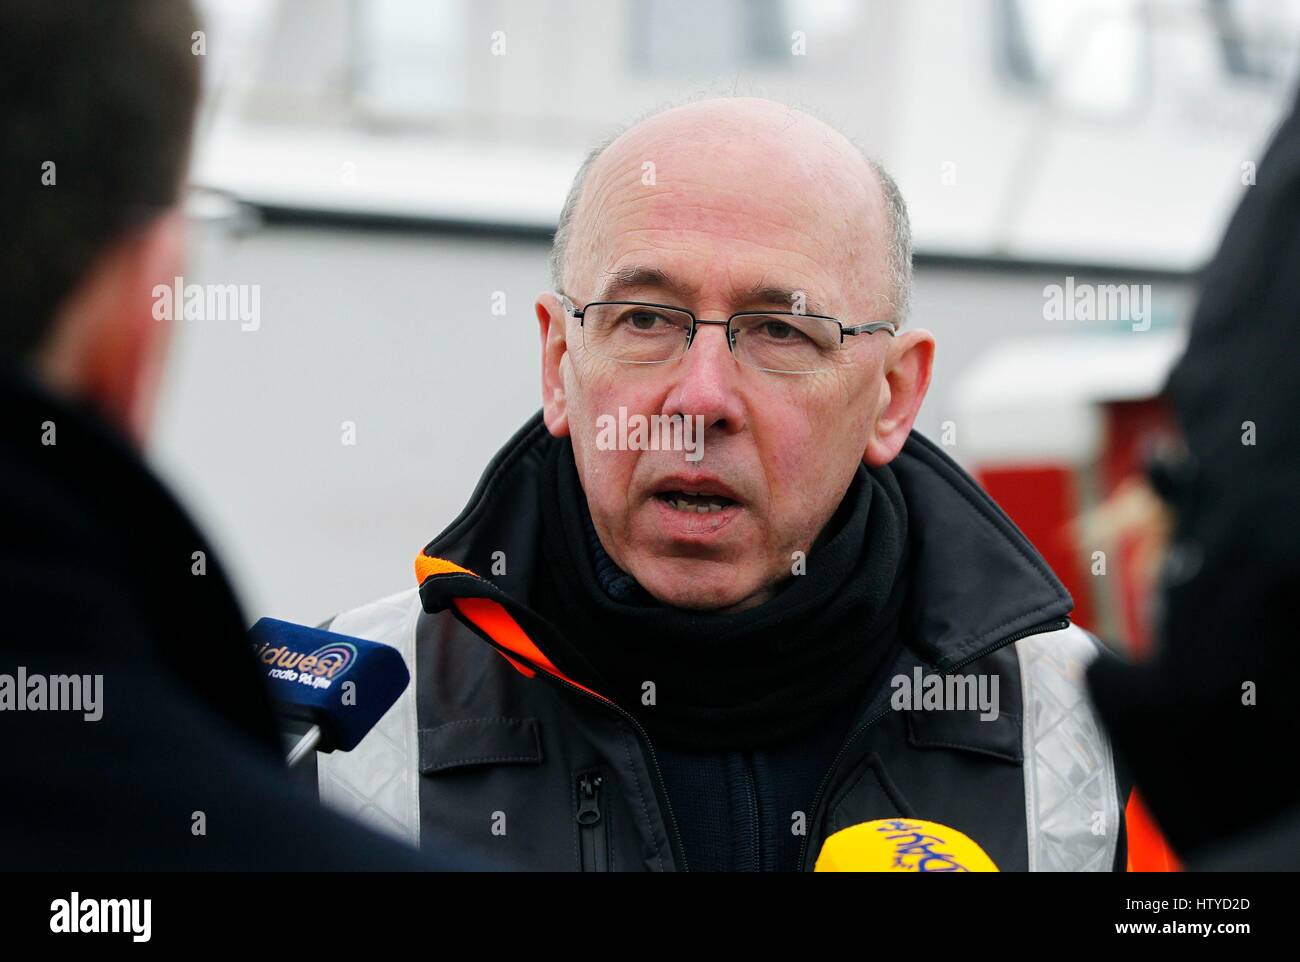 Gerard O'Flynn, the search and rescue operations manager with the Irish Coast Guard, speaks to the media as the search continues for an Irish Coast Guard helicopter which went missing off the west coast of Ireland in the early hours of yesterday morning. Picture date: Wednesday March 15, 2017. See PA story IRISH Coastguard. Photo credit should read: Brian Lawless/PA Wire Stock Photo